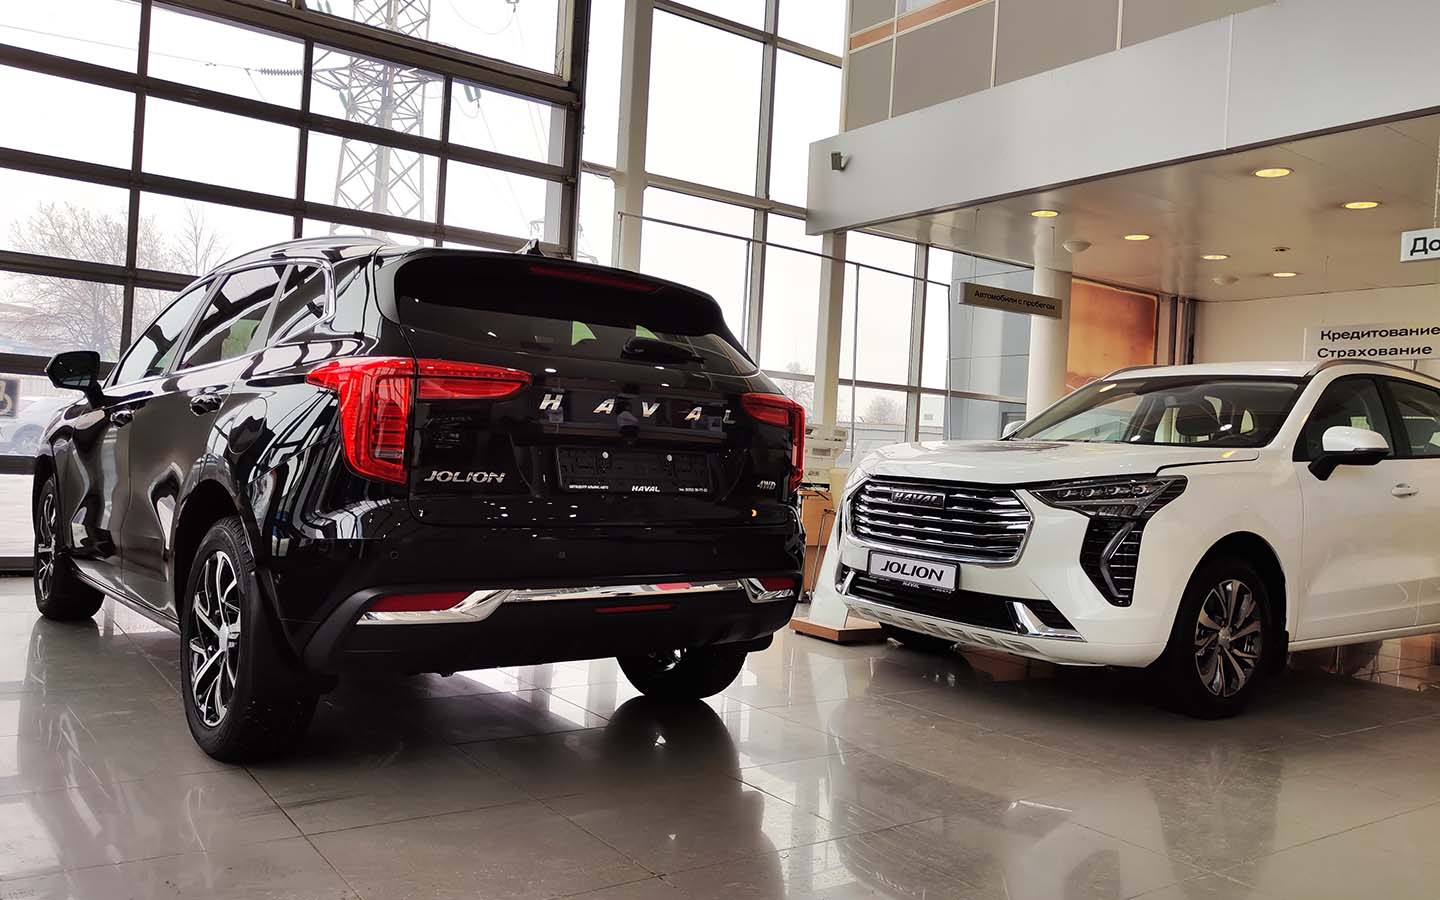 Abu Dhabi Haval Showroom and service centre 